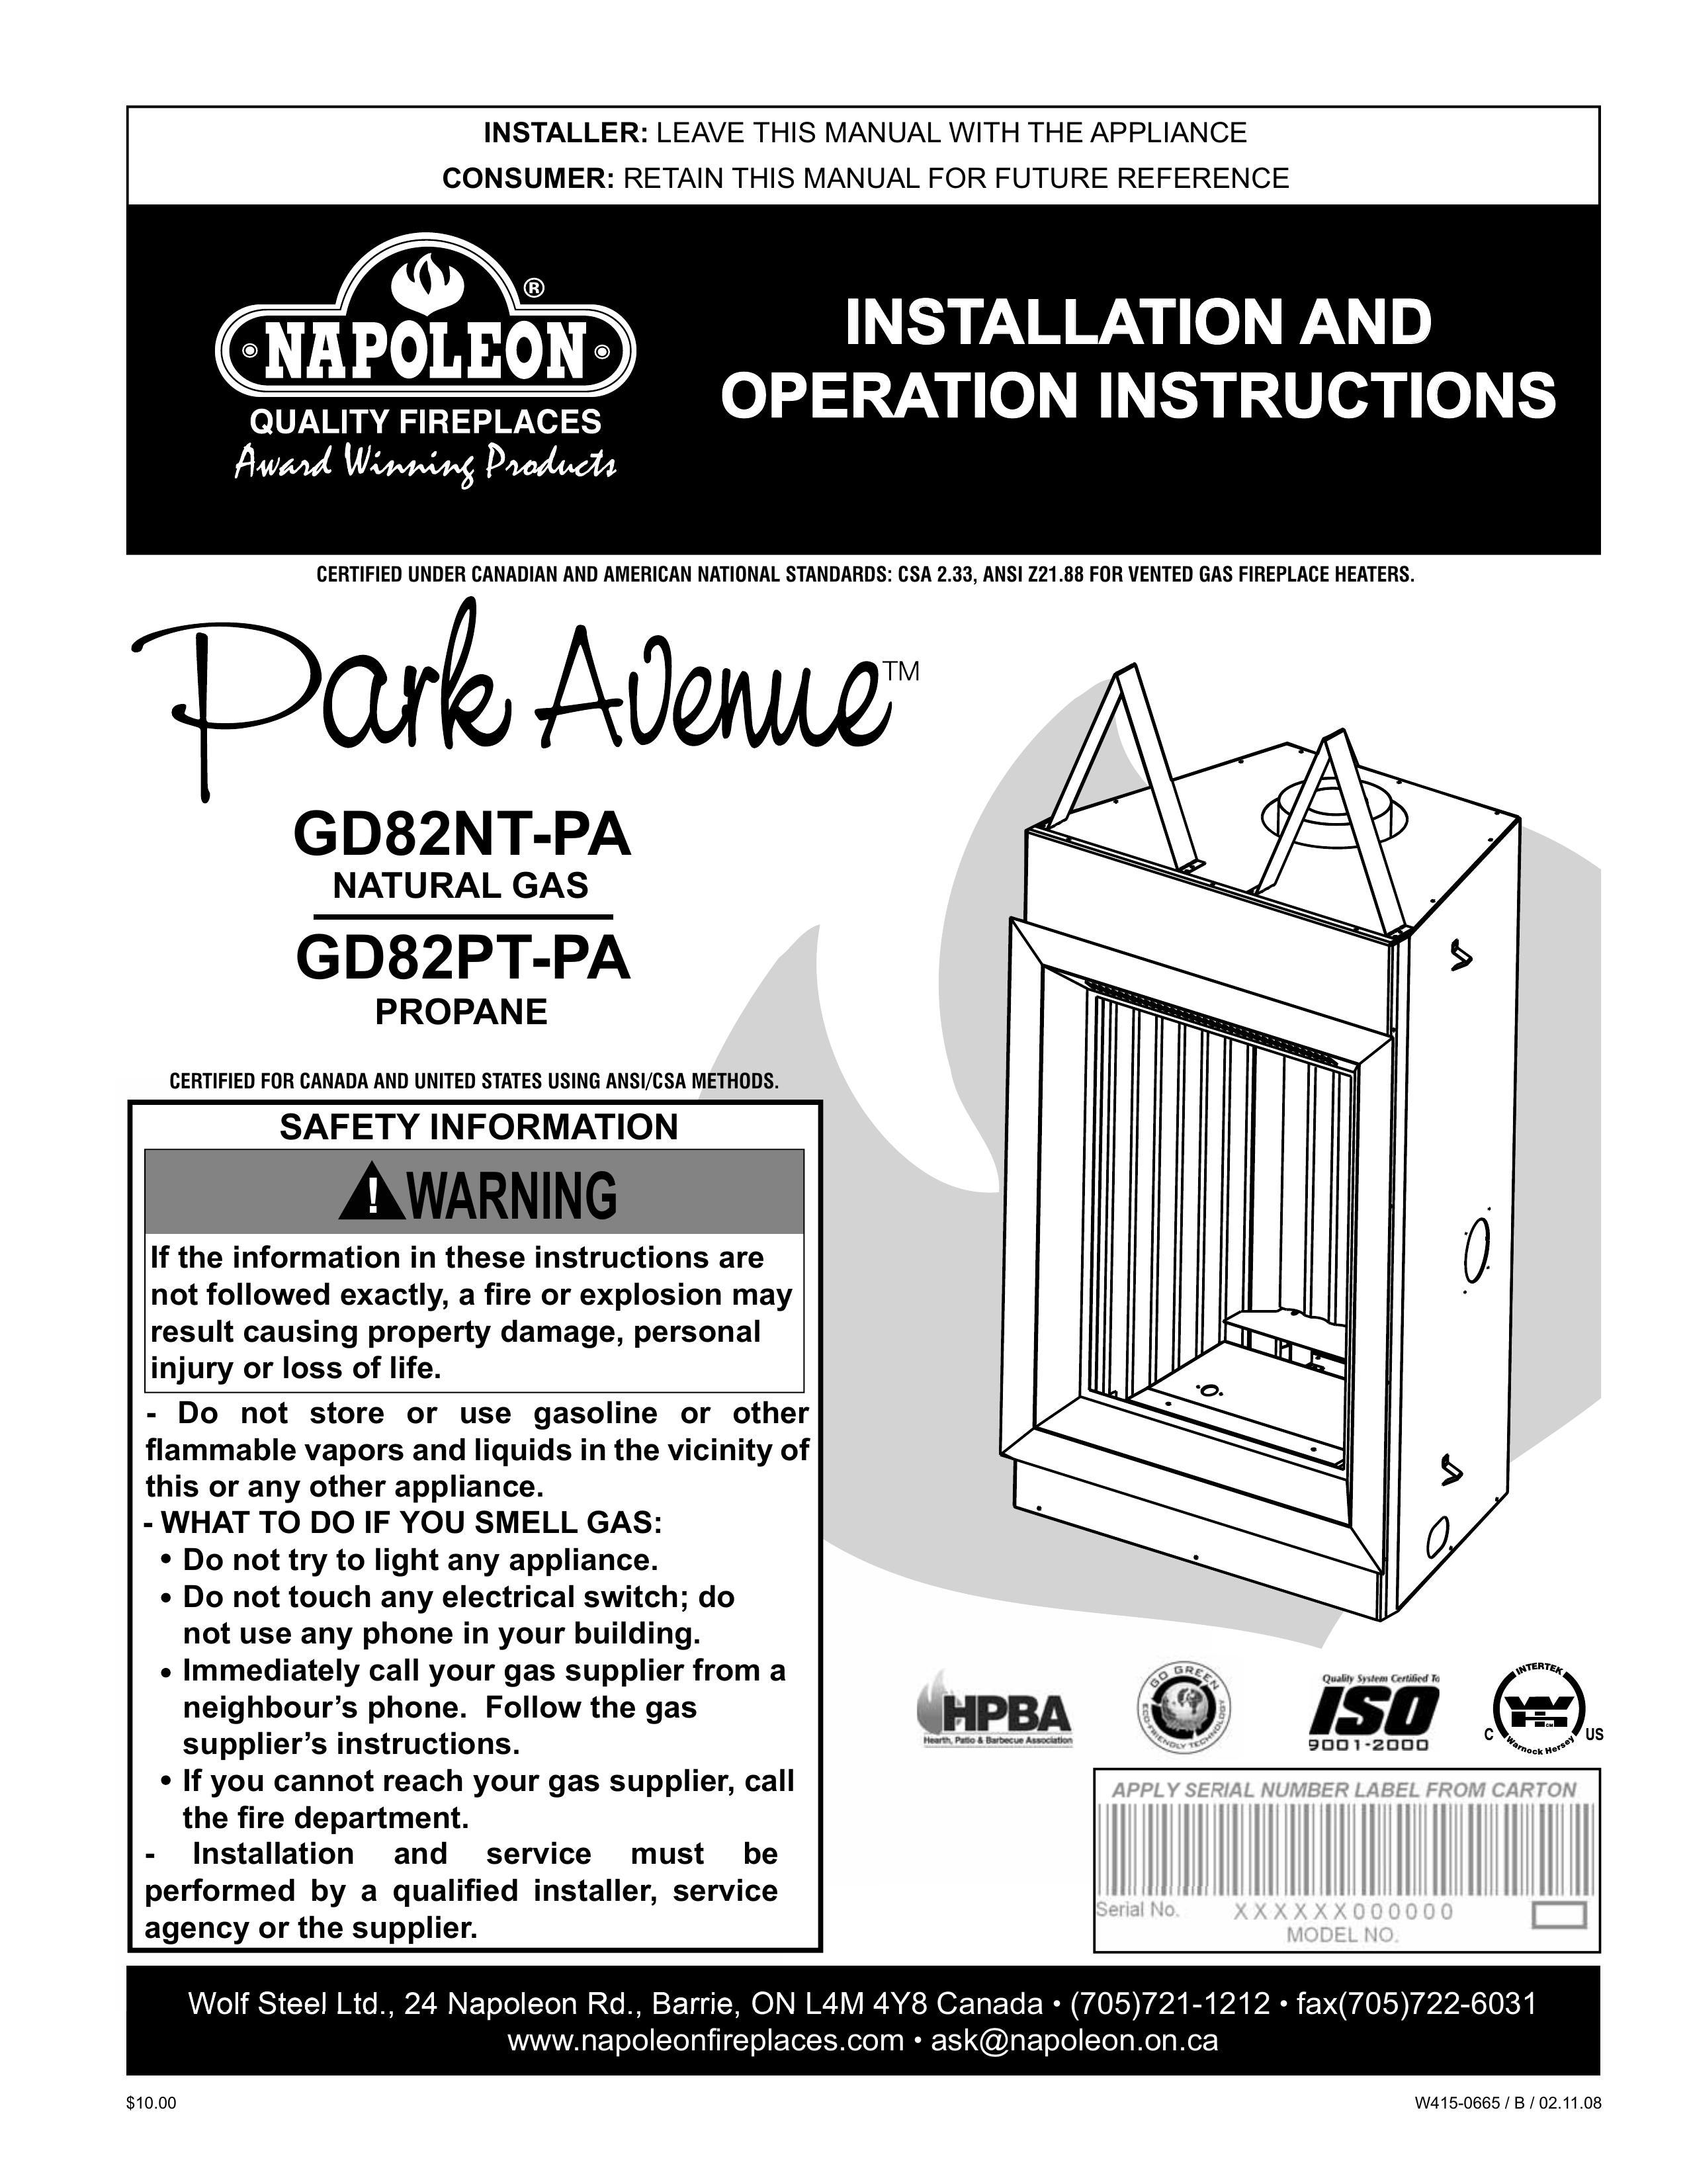 Napoleon Fireplaces GD82NT-PA Fire Pit User Manual